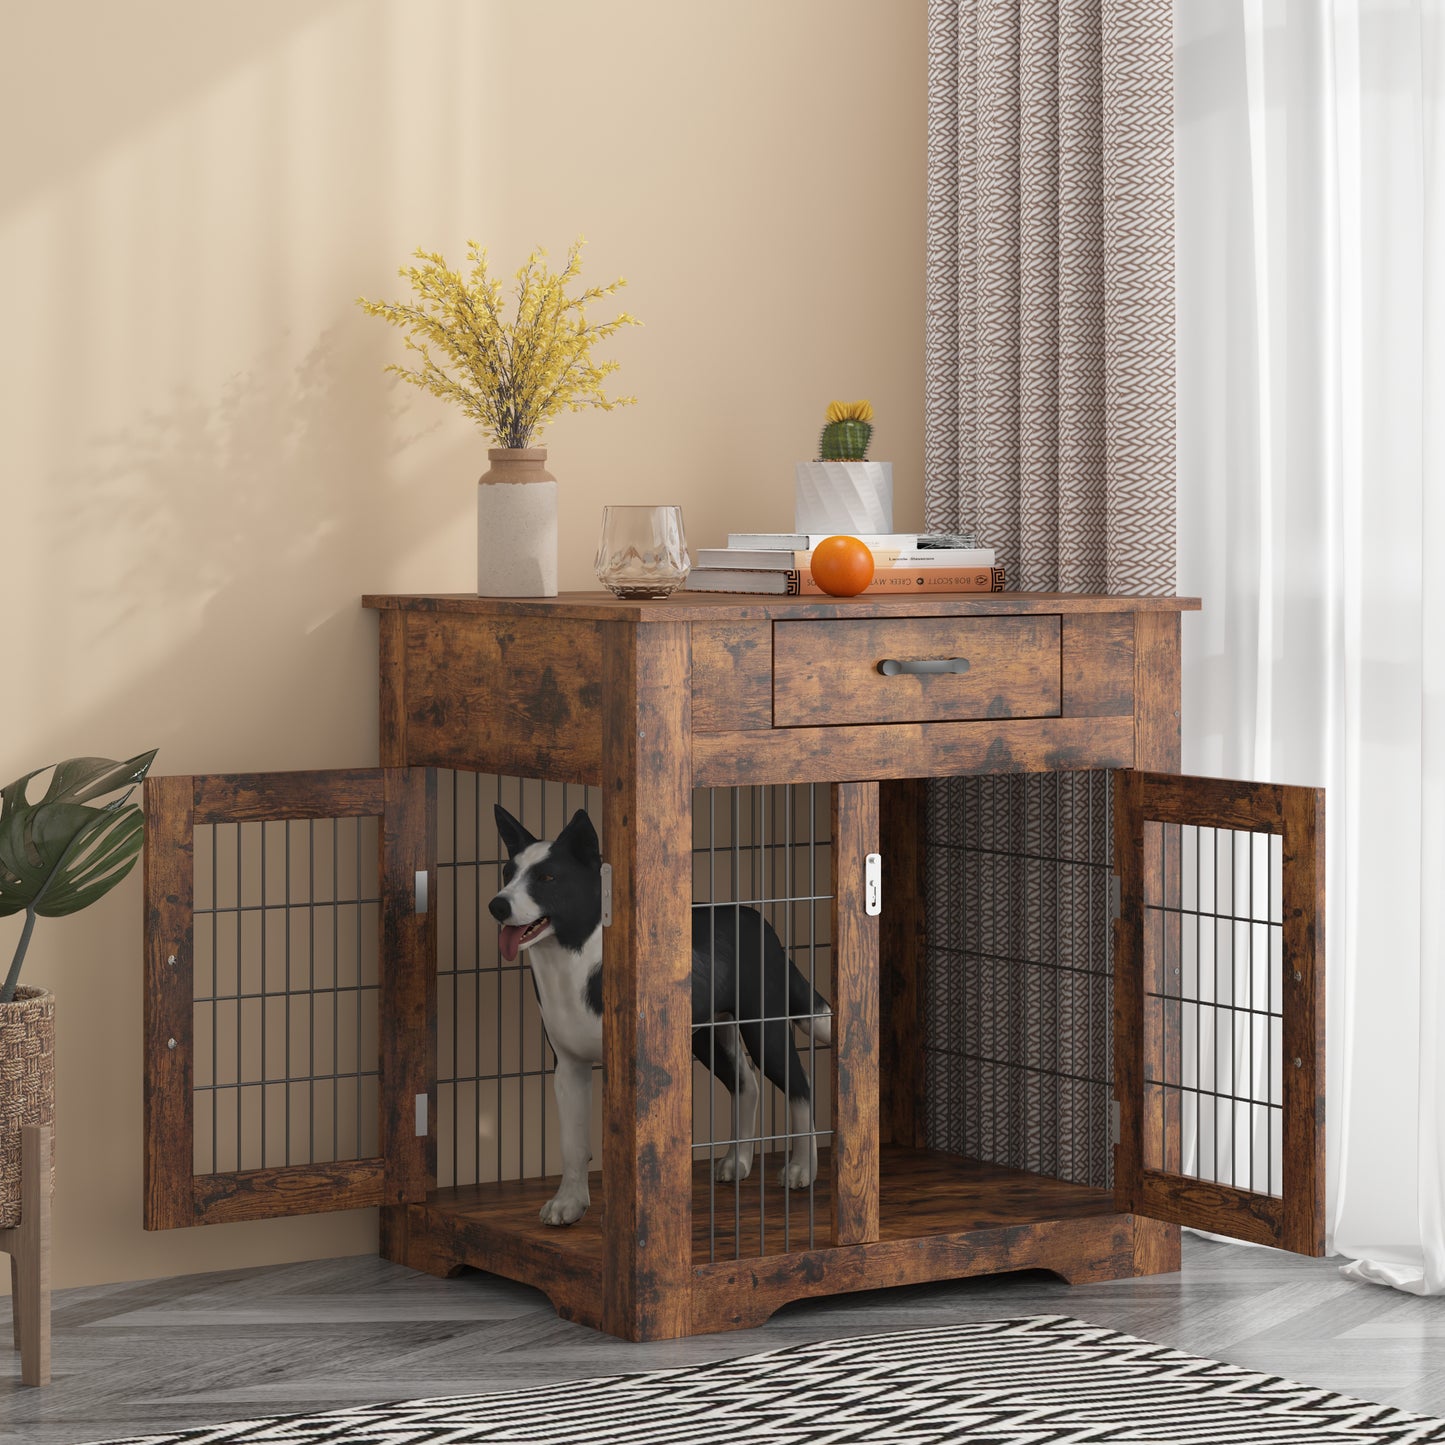 JHX Furniture Style Dog Crate End Table with Drawer, Pet Kennels with Double Doors , Dog House Indoor Use, （Rustic Brown，29.92”w x 24.80”d x 30.71”h）